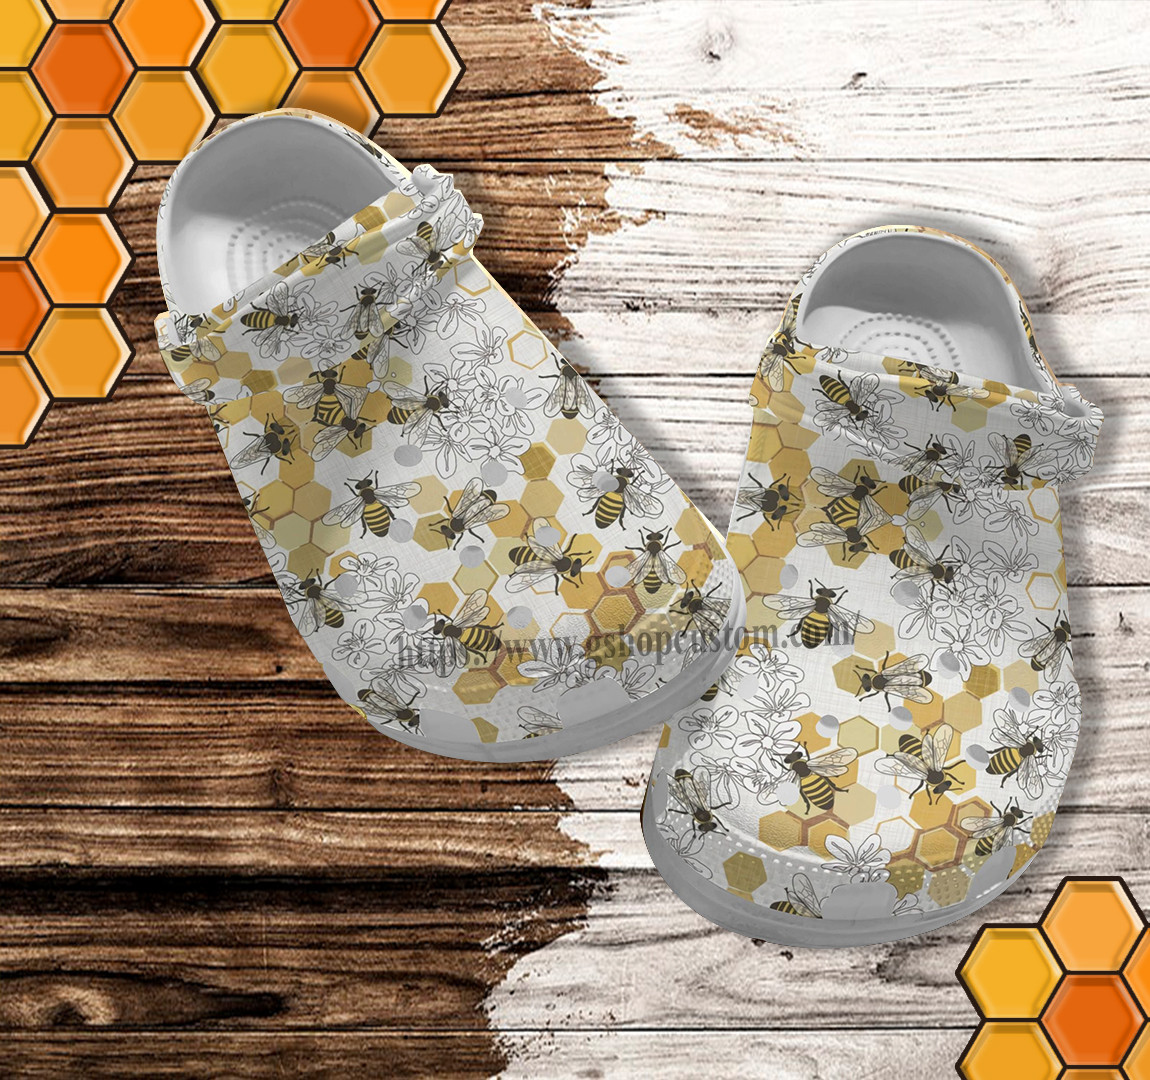 Bee Girl Vintage Croc Shoes Gift Mother Day- Bee Kind Hippie Shoes Croc Clogs- Cr-Ne0351